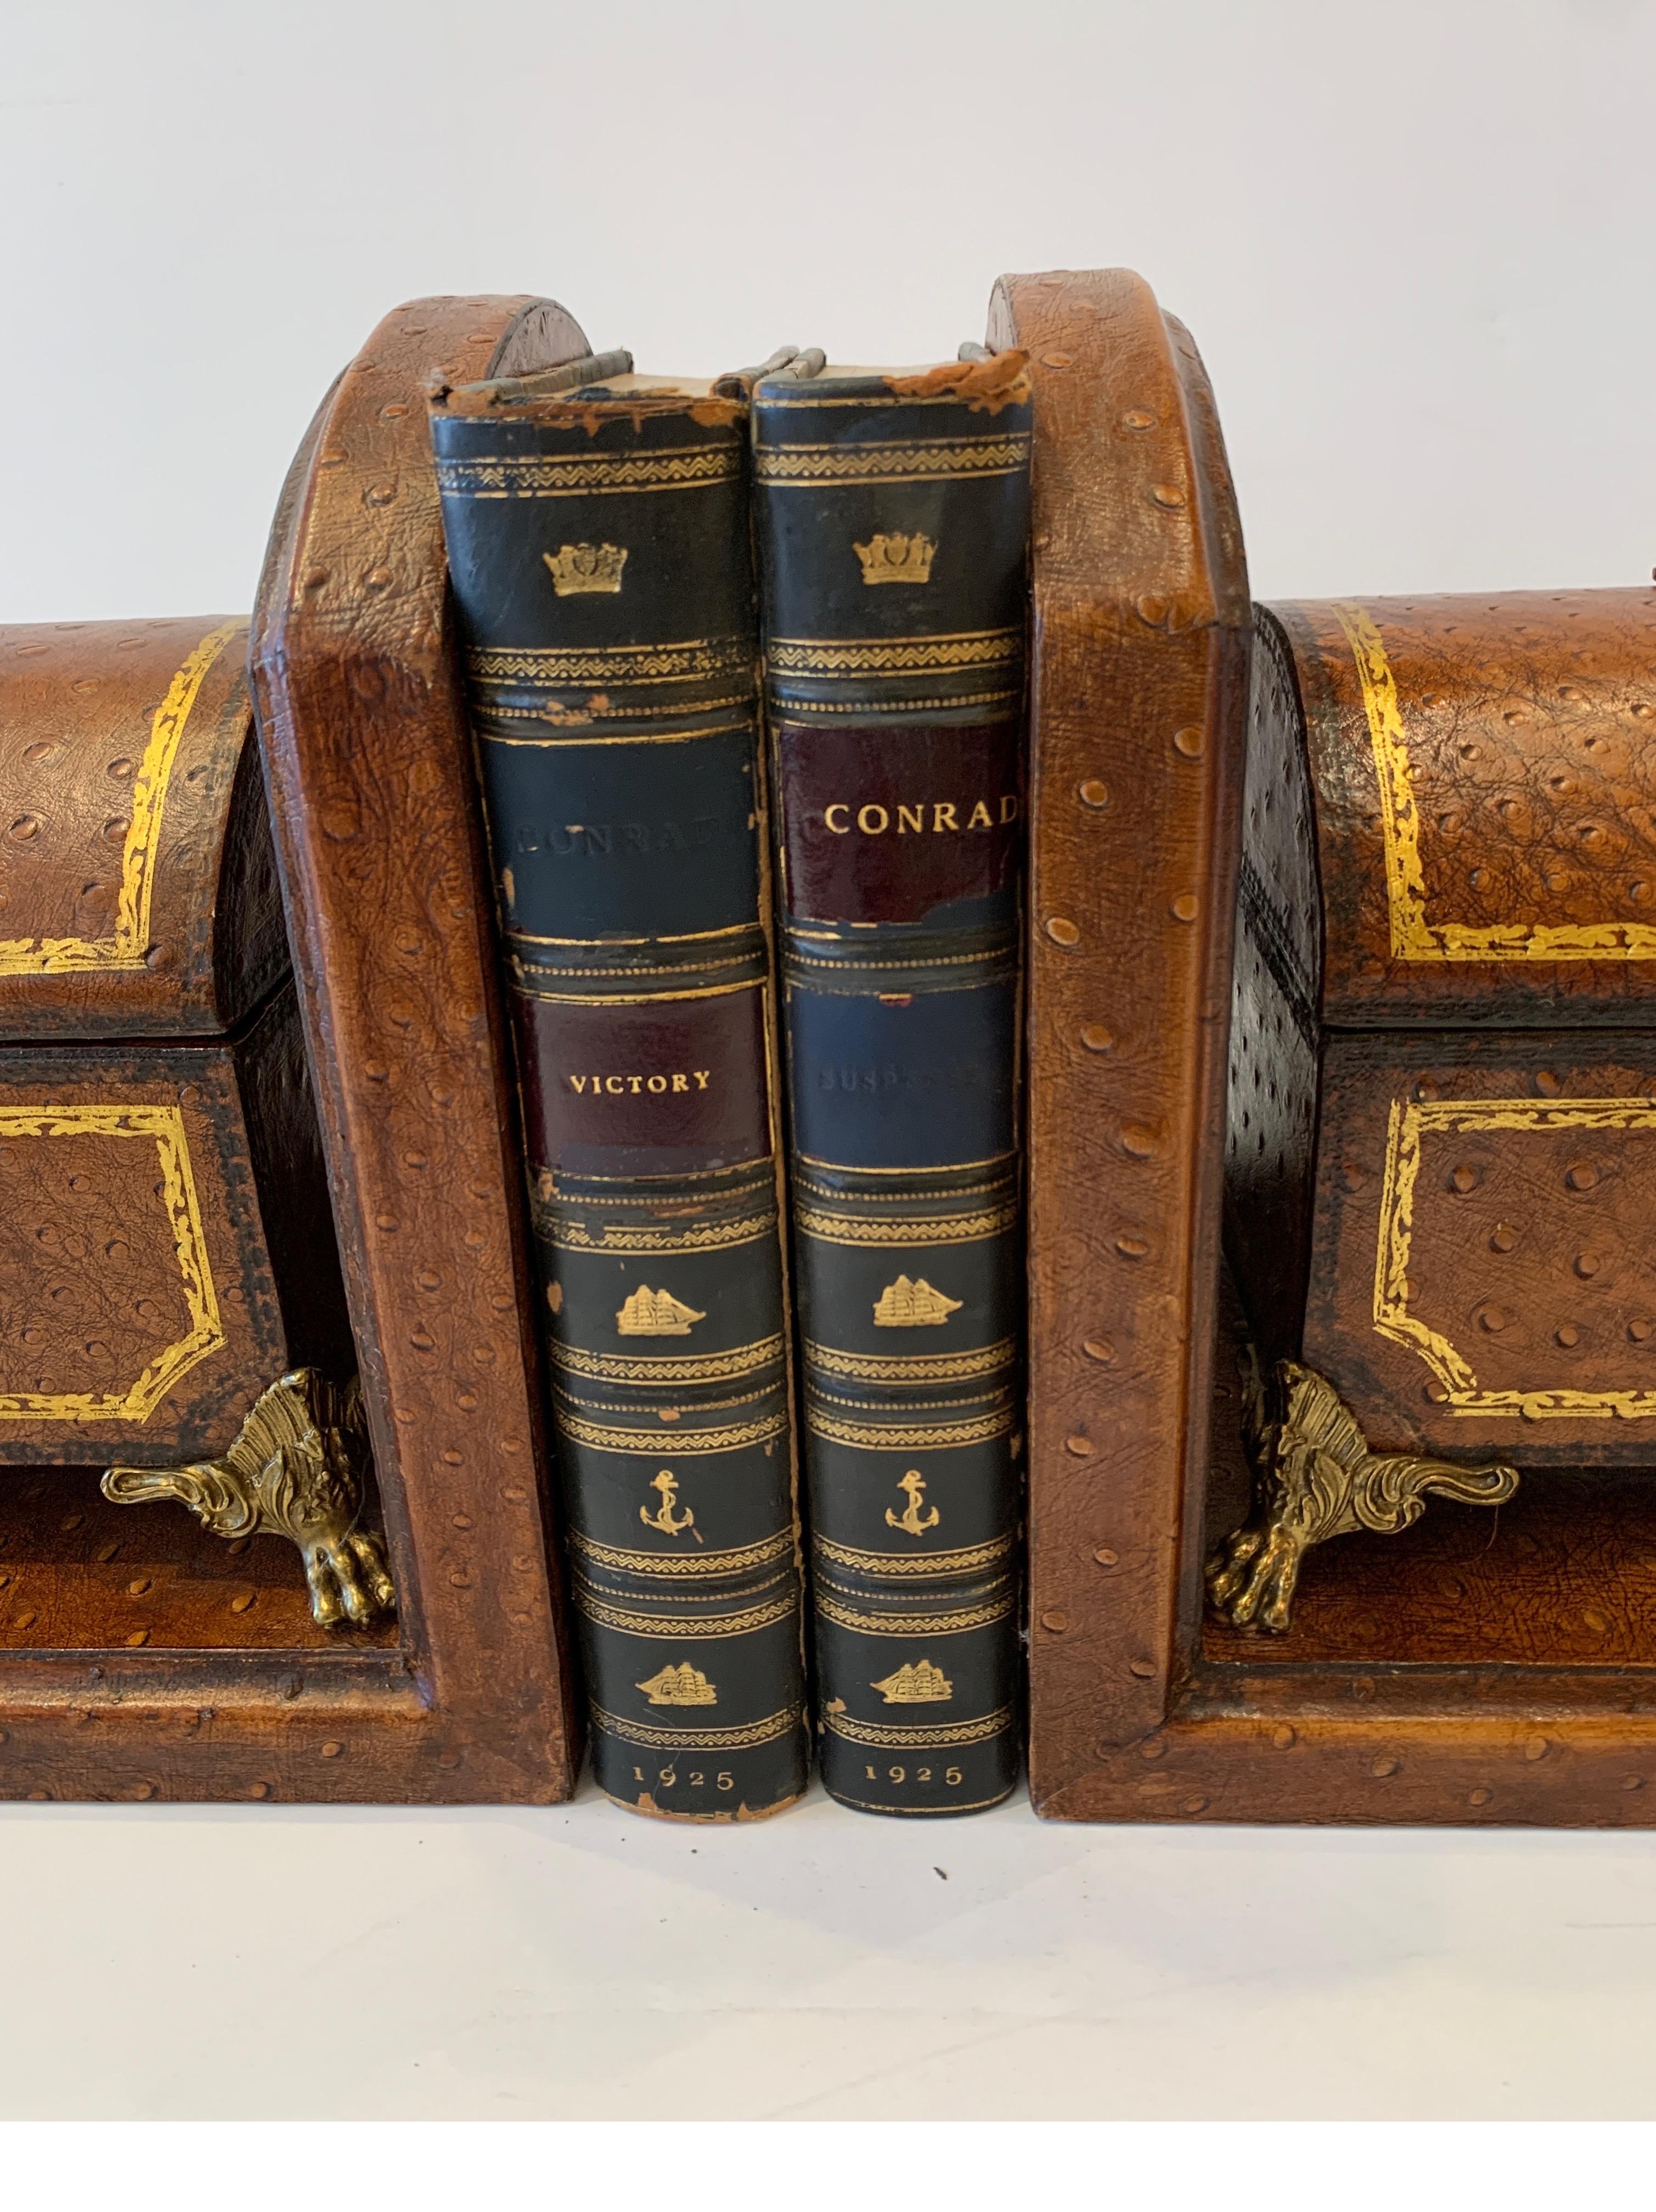 Philippine Faux Ostrich Leather Maitland Smith Bookends with Decorative Boxes That Open